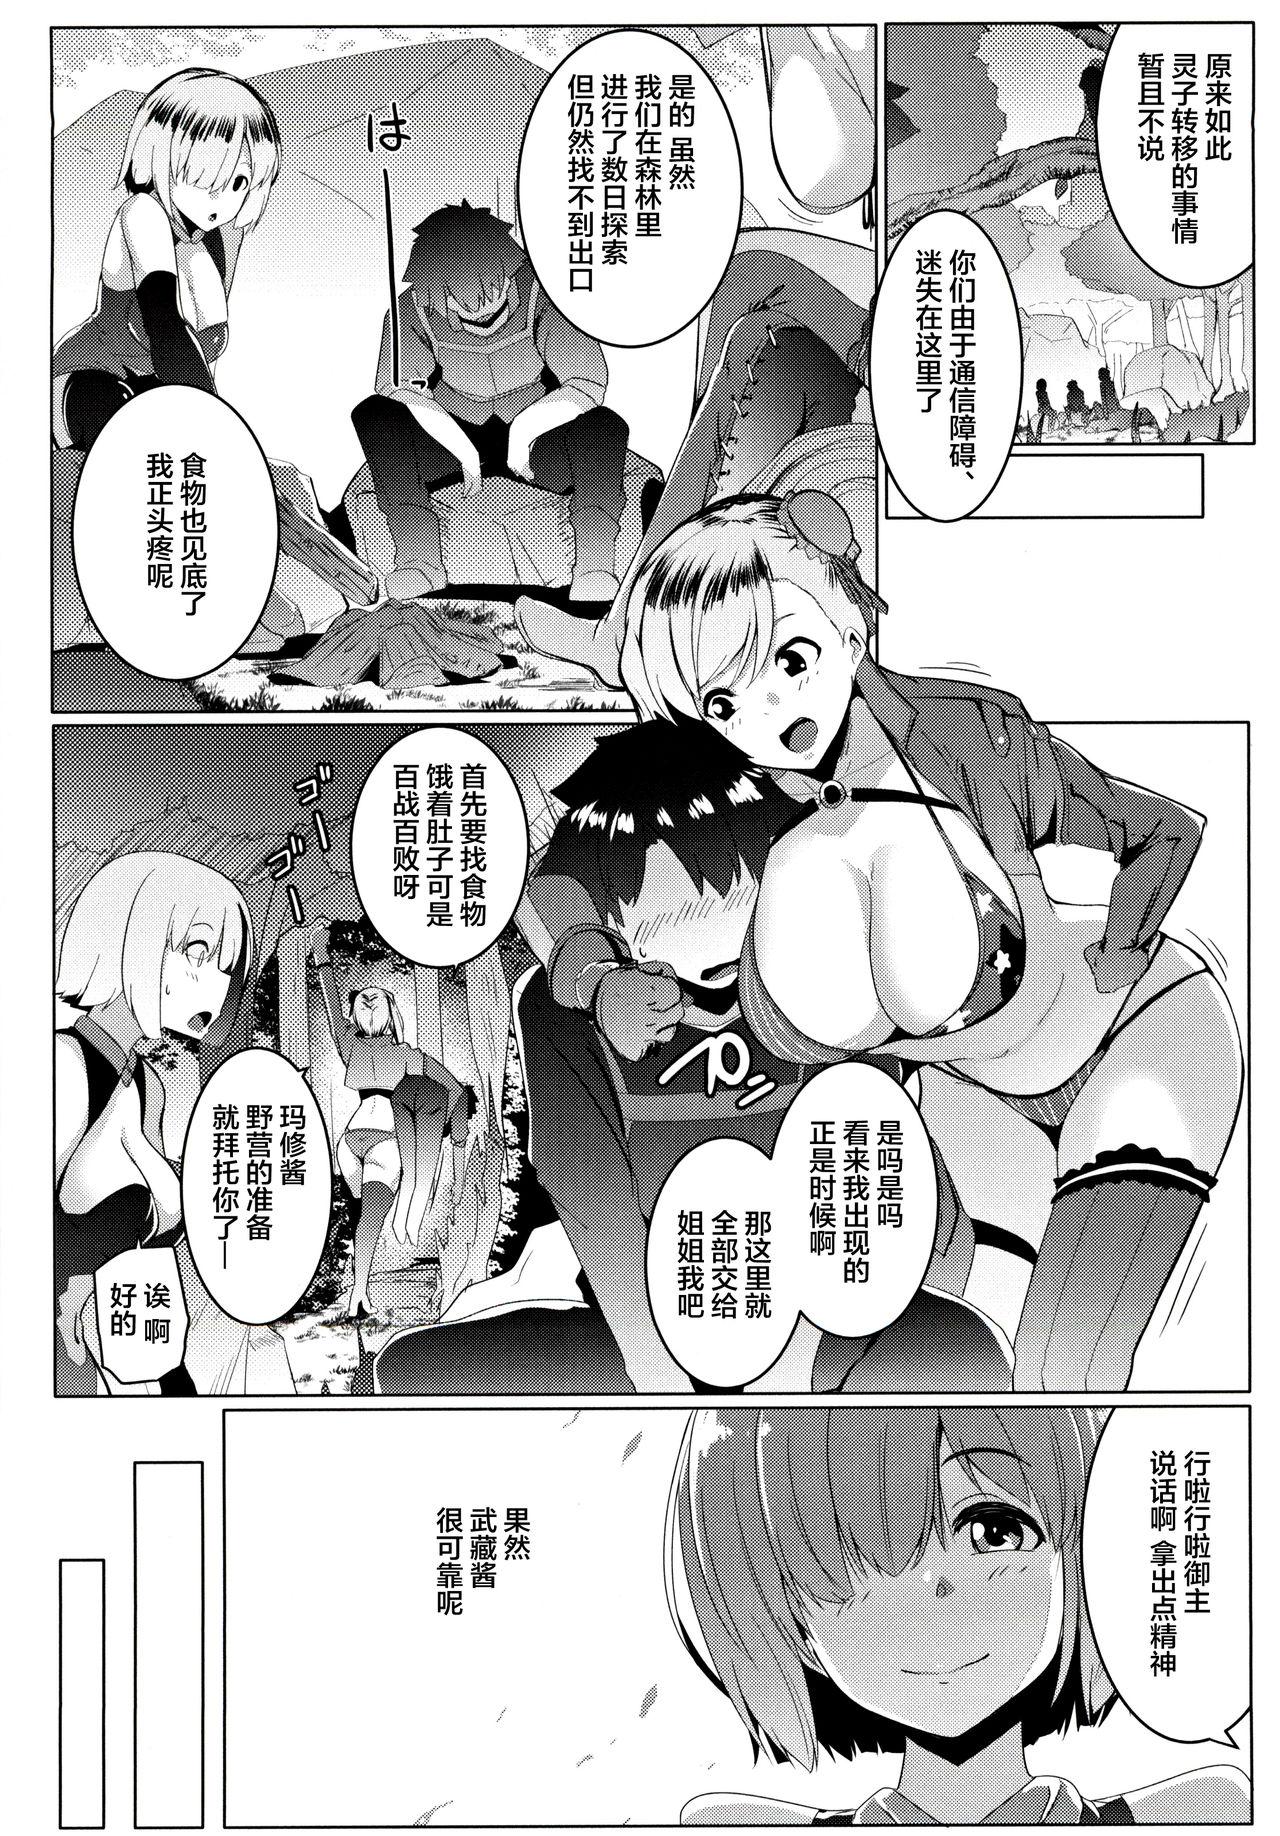 Action Musashi-chan to PakoCam - Fate grand order Mexicana - Page 5